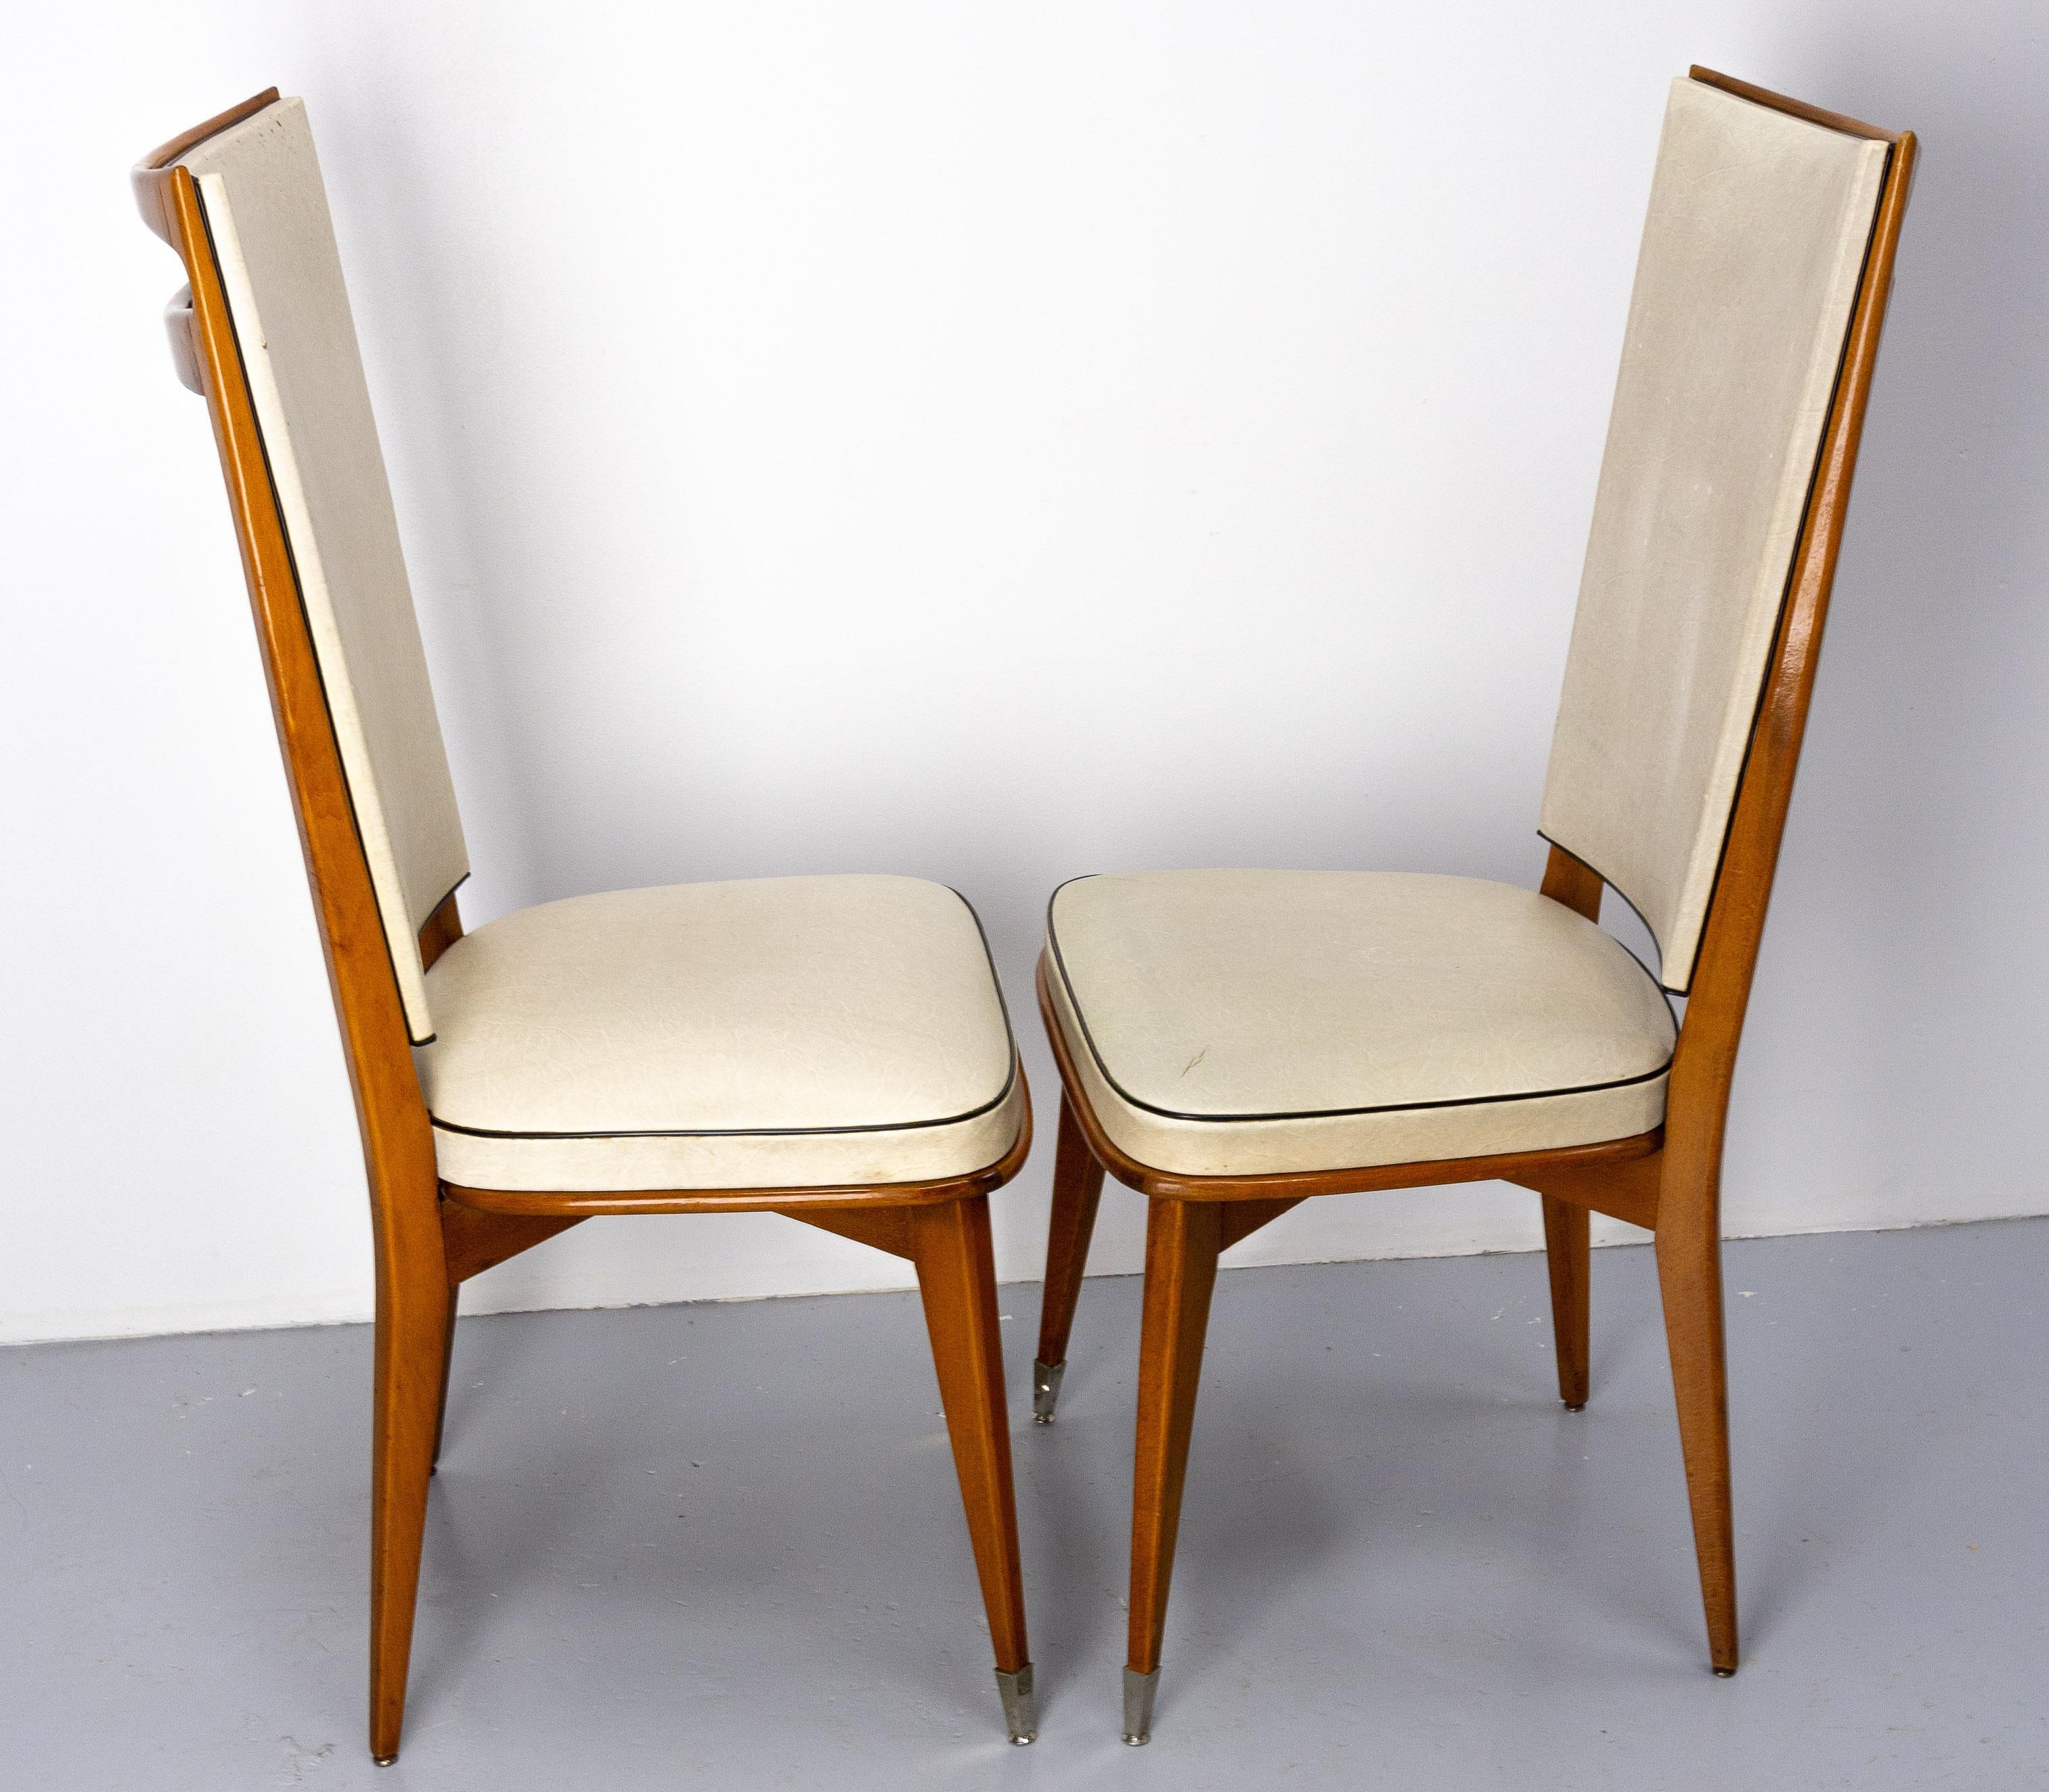 Six Dining Chairs Beech and Skai to Recover Midcentury French, circa 1950 For Sale 1